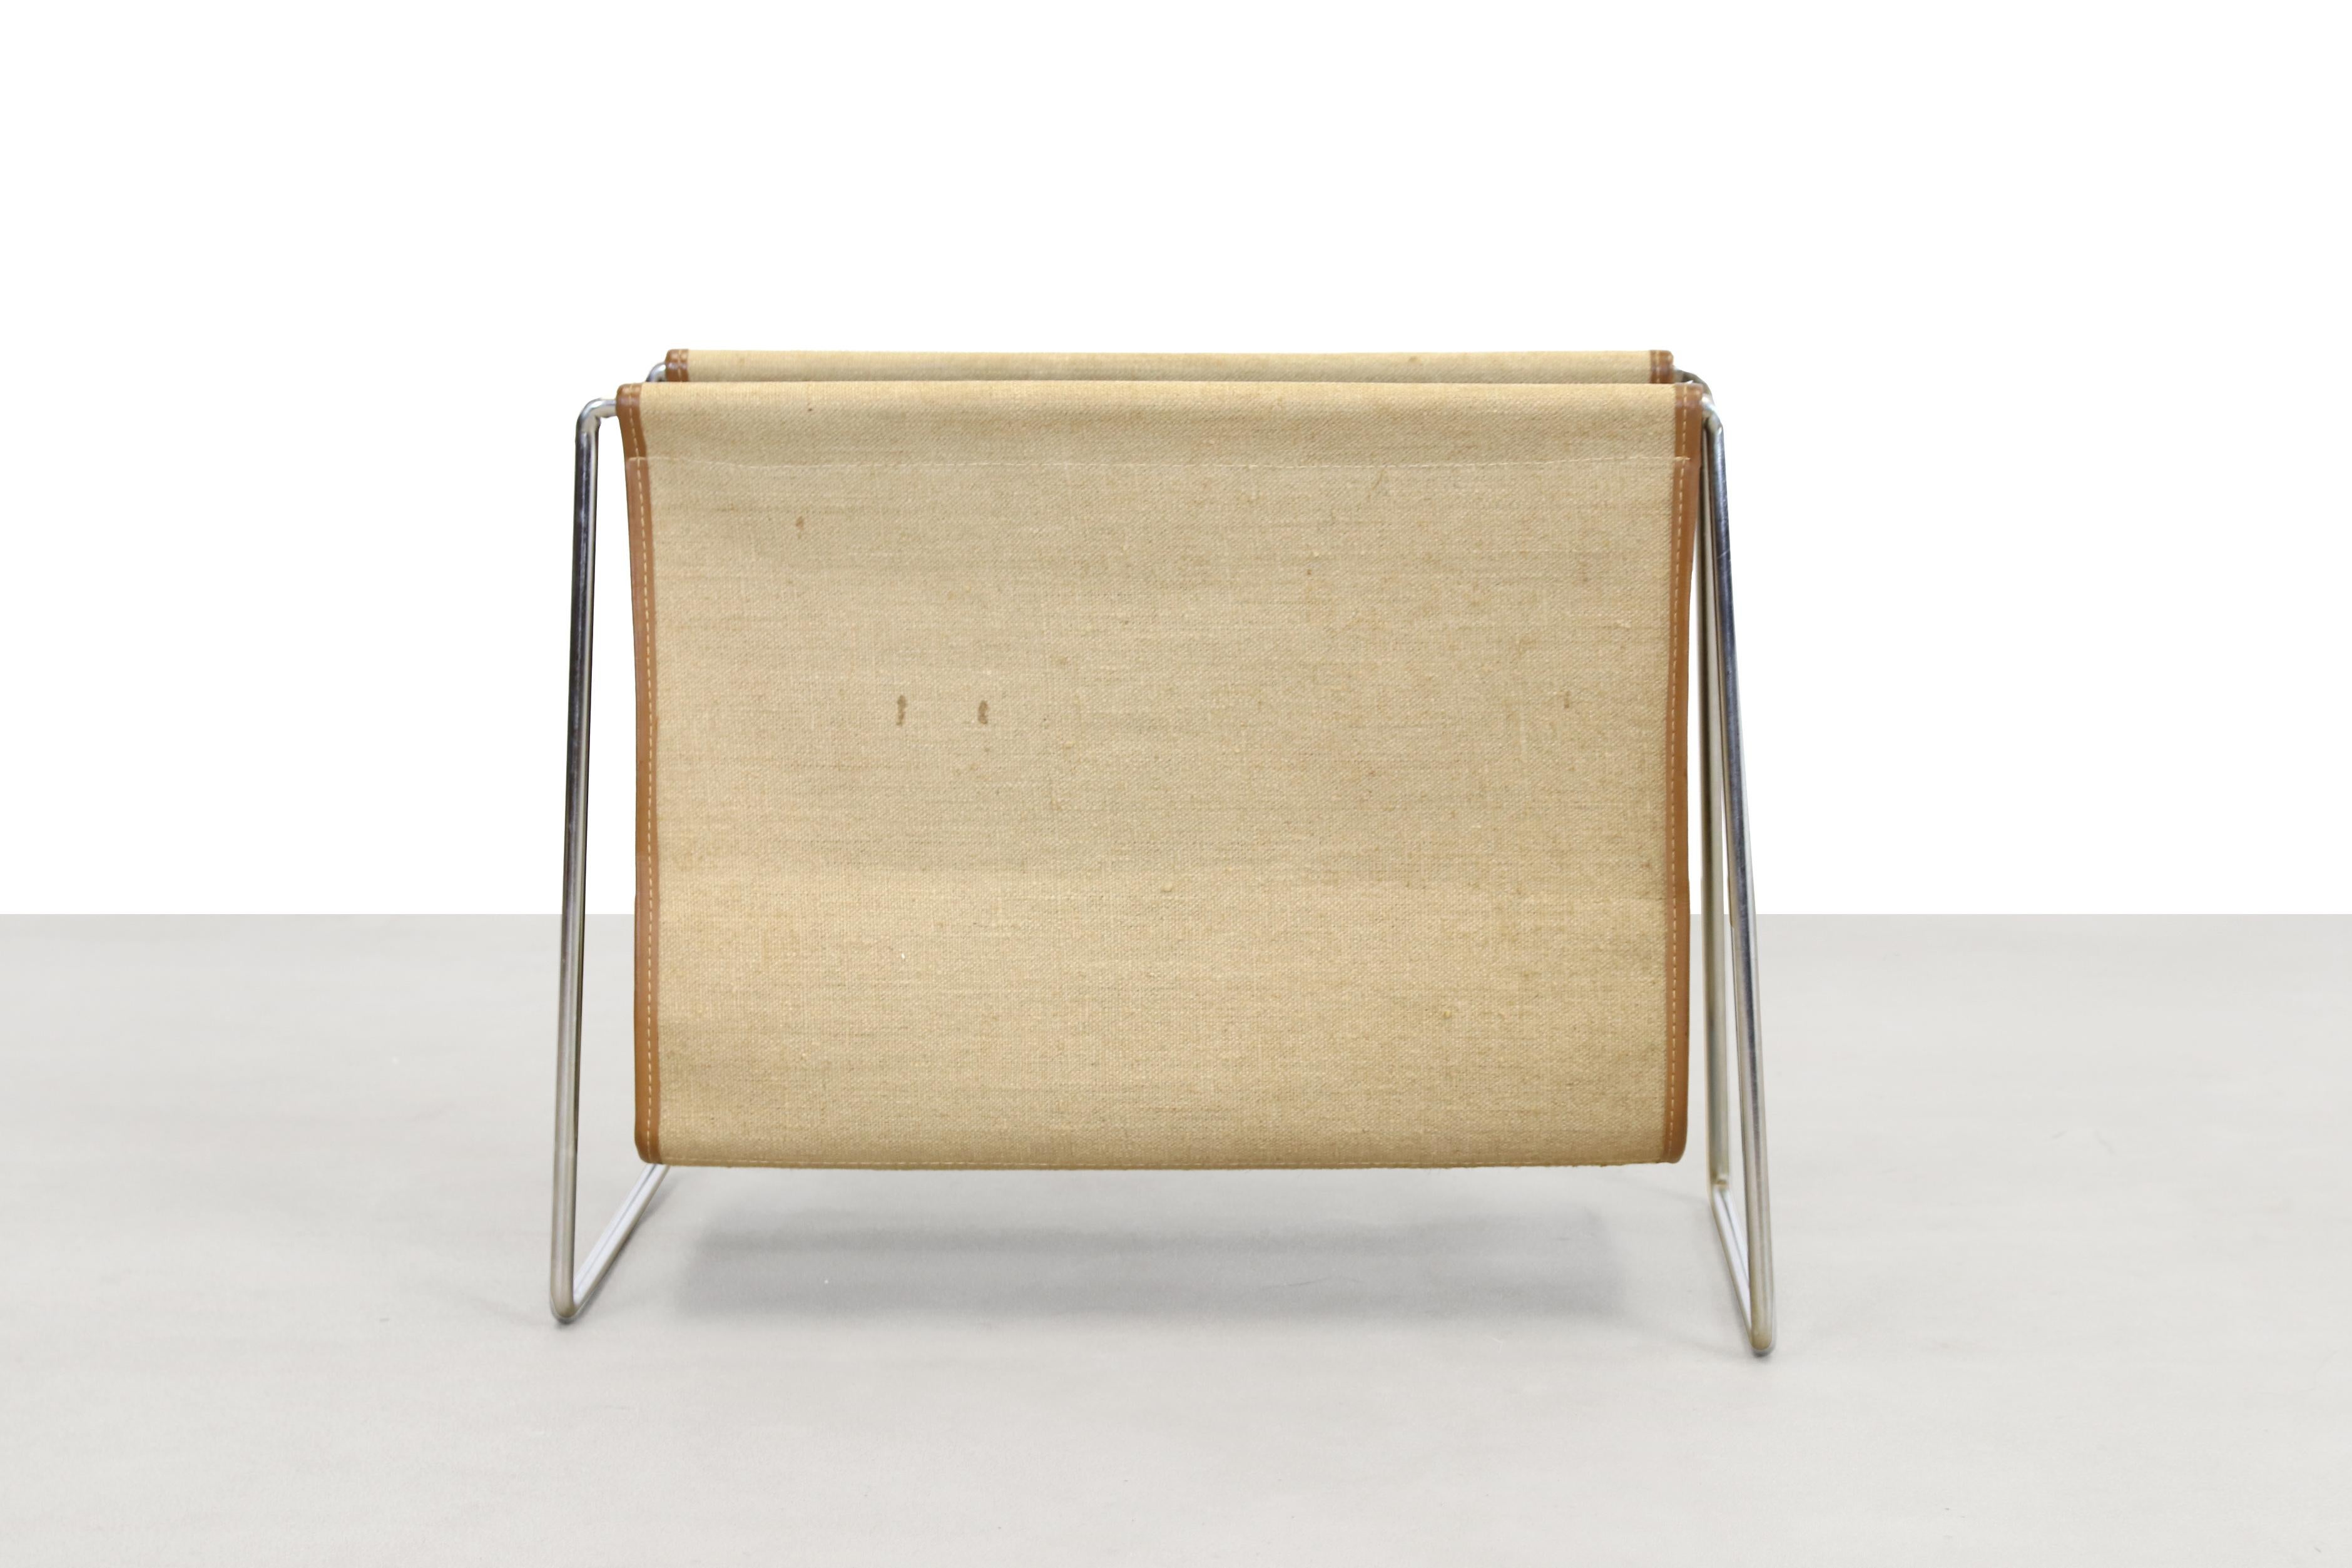 Beautiful canvas magazine holder designed by Verner Panton and produced by Fritz Hansen in Denmark. This magazine rack is made of bent chromed steel tubes and canvas with leather. 
Very minimalist and timeless design by a great Danish designer.